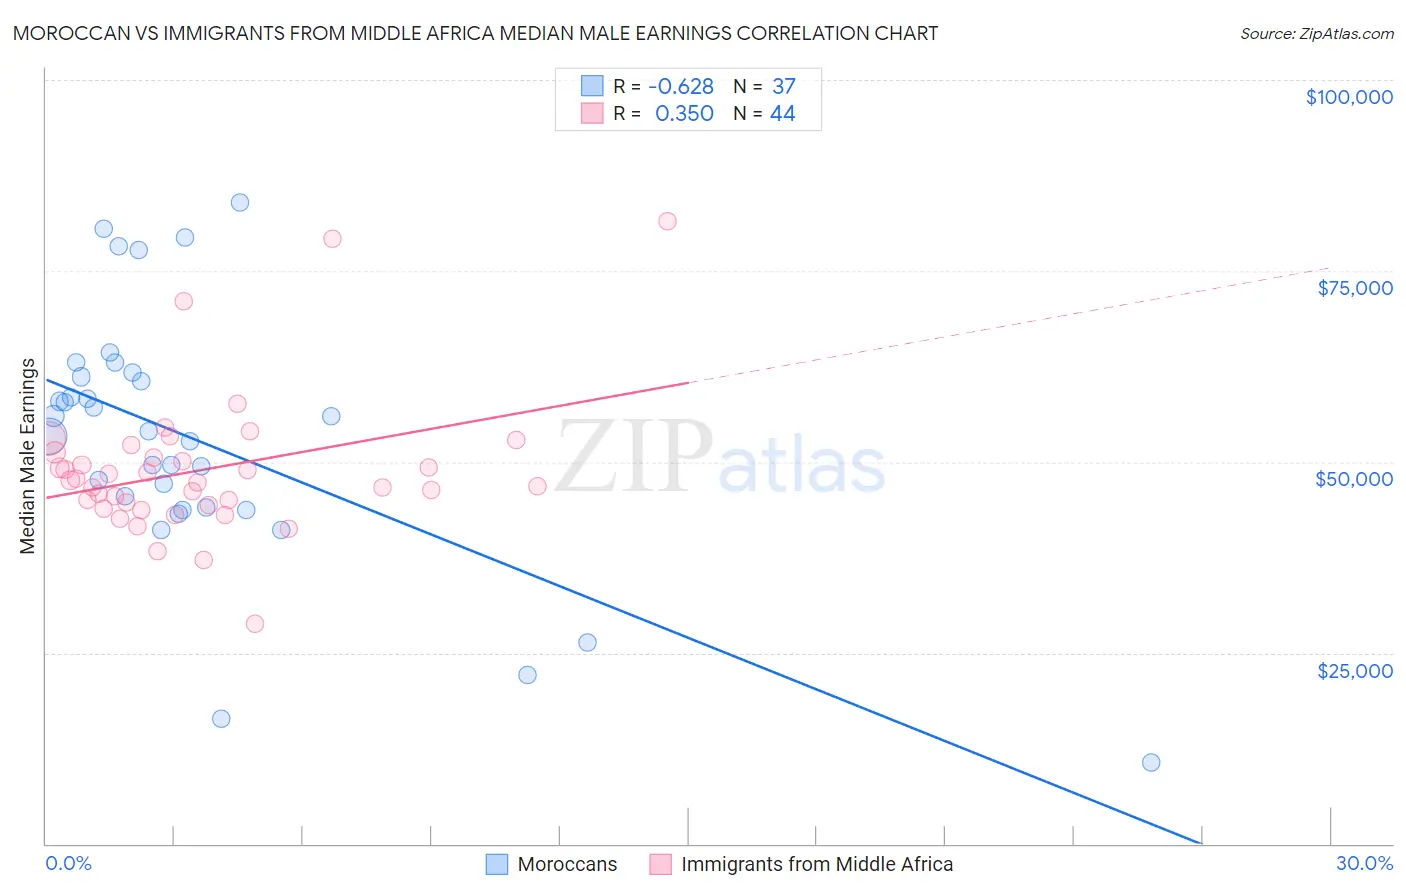 Moroccan vs Immigrants from Middle Africa Median Male Earnings